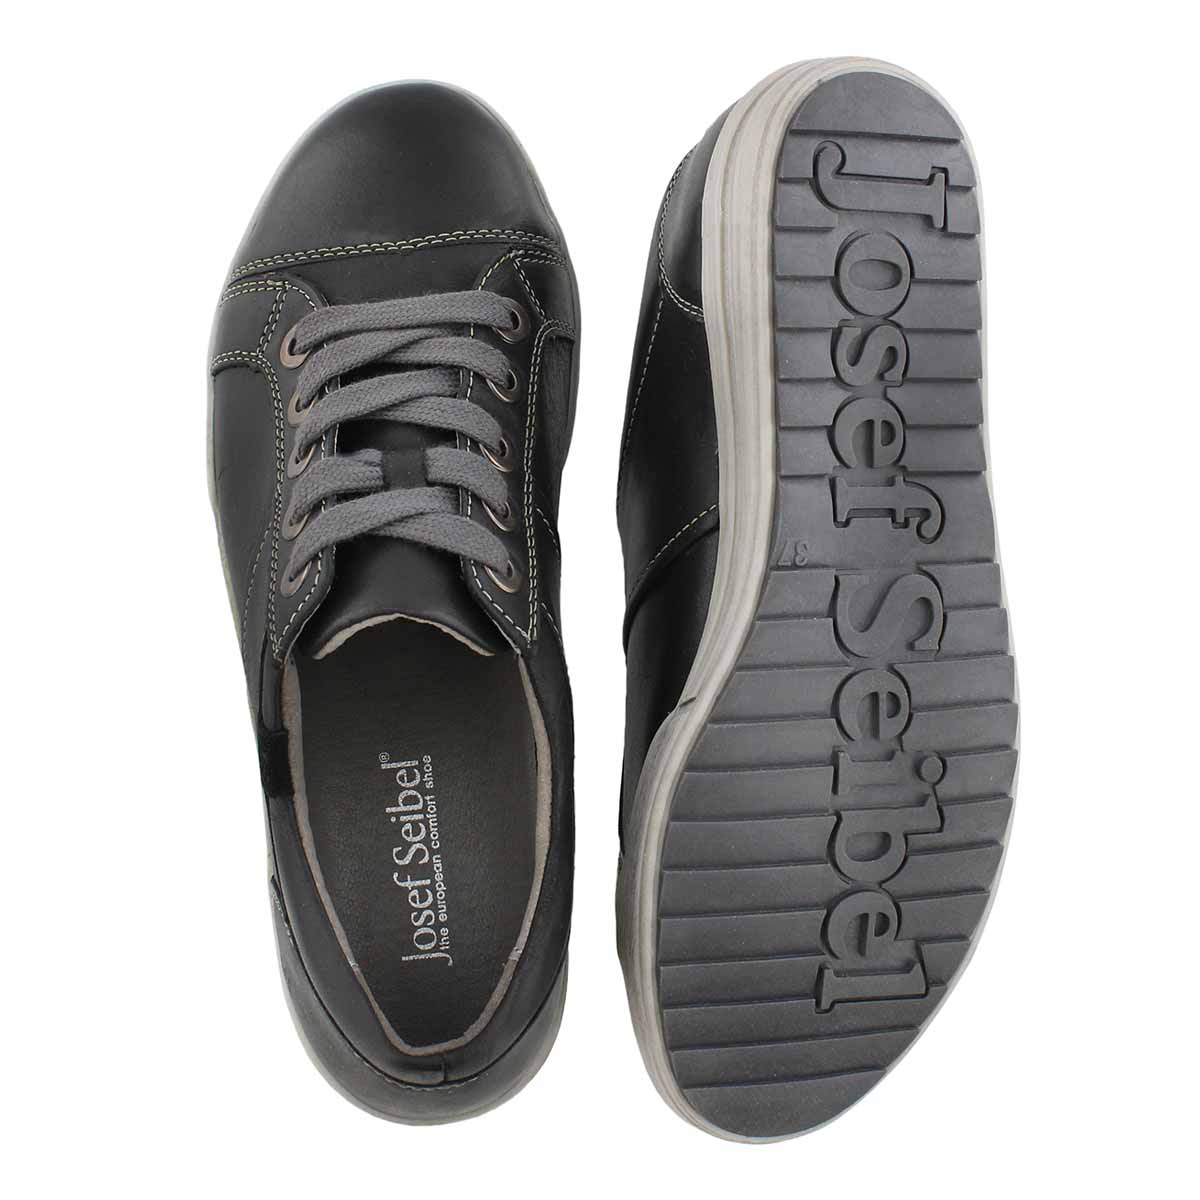 Dany 59 Lace Up Casual Sneaker | eBay